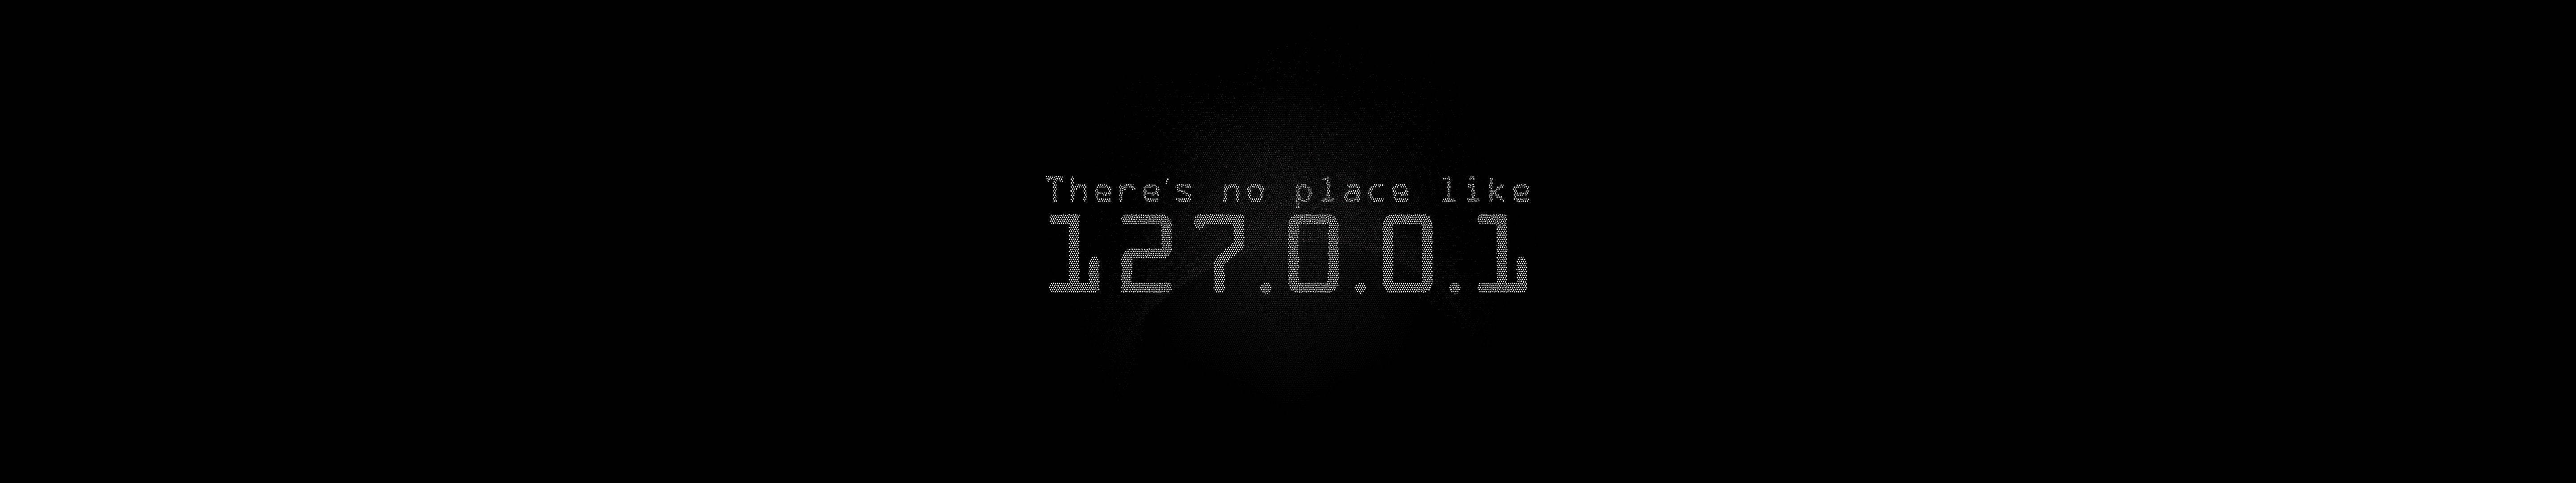 There's No Place Like 127.0.0.1 Meme Wallpaper